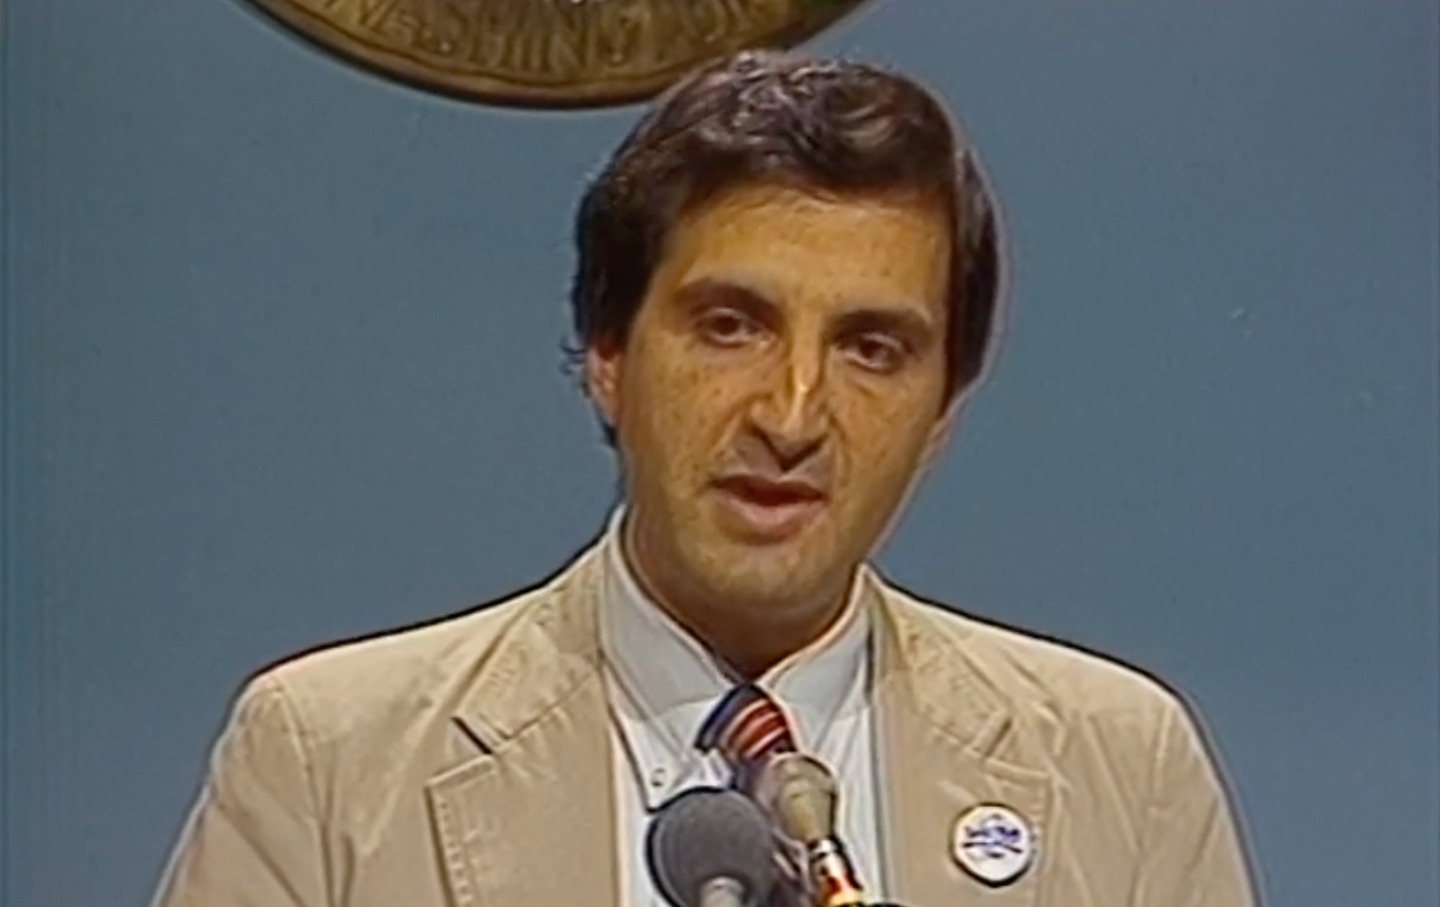 James Zogby at a press conference in 1990.